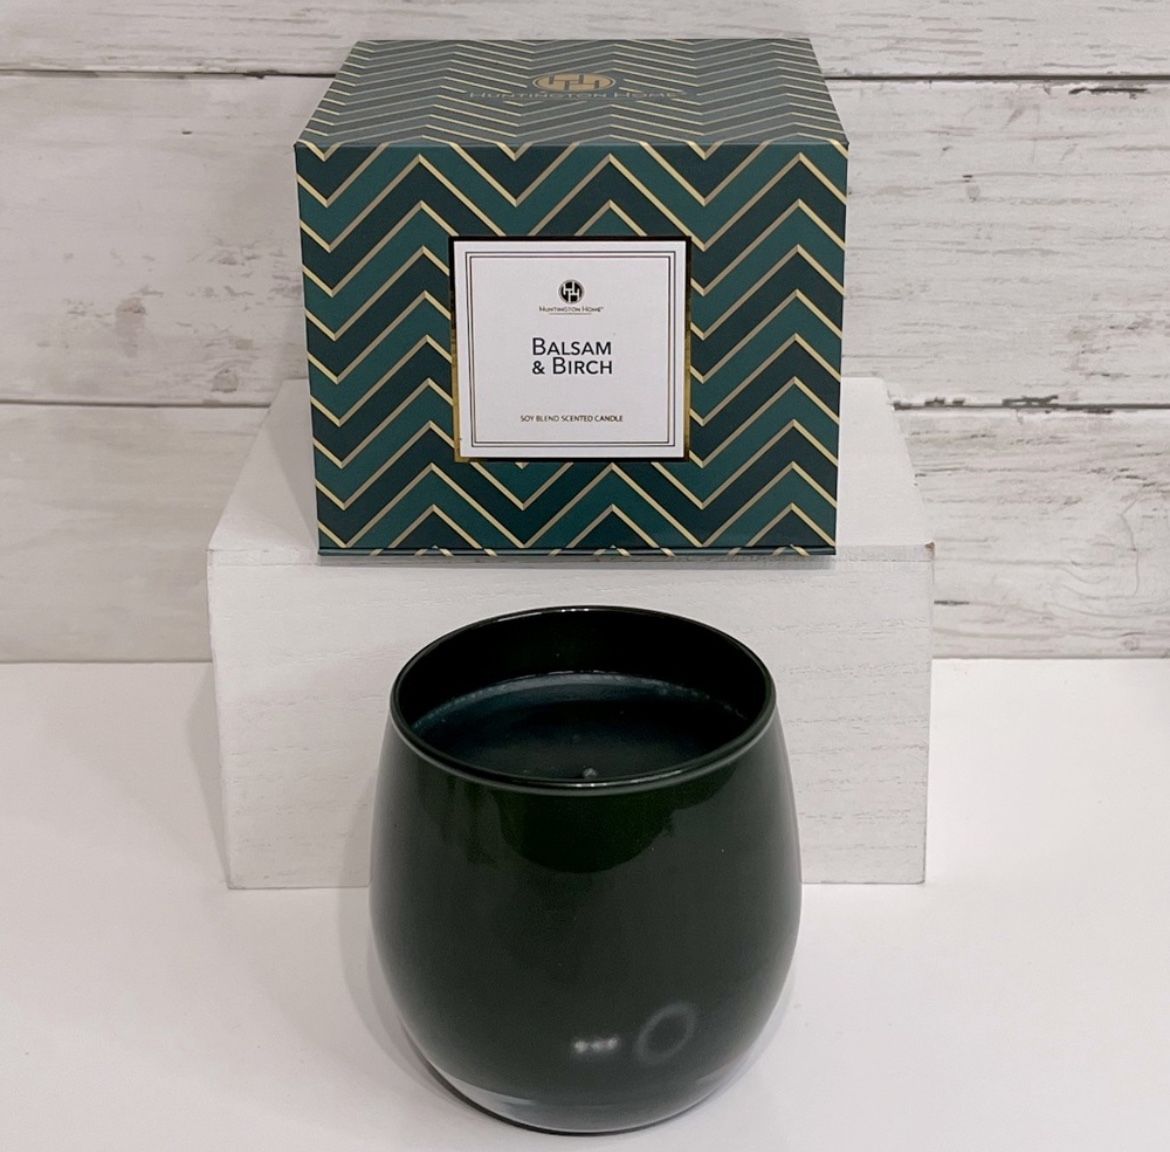 NIB Huntington Home Balsam & Birch Scented Holiday Candle